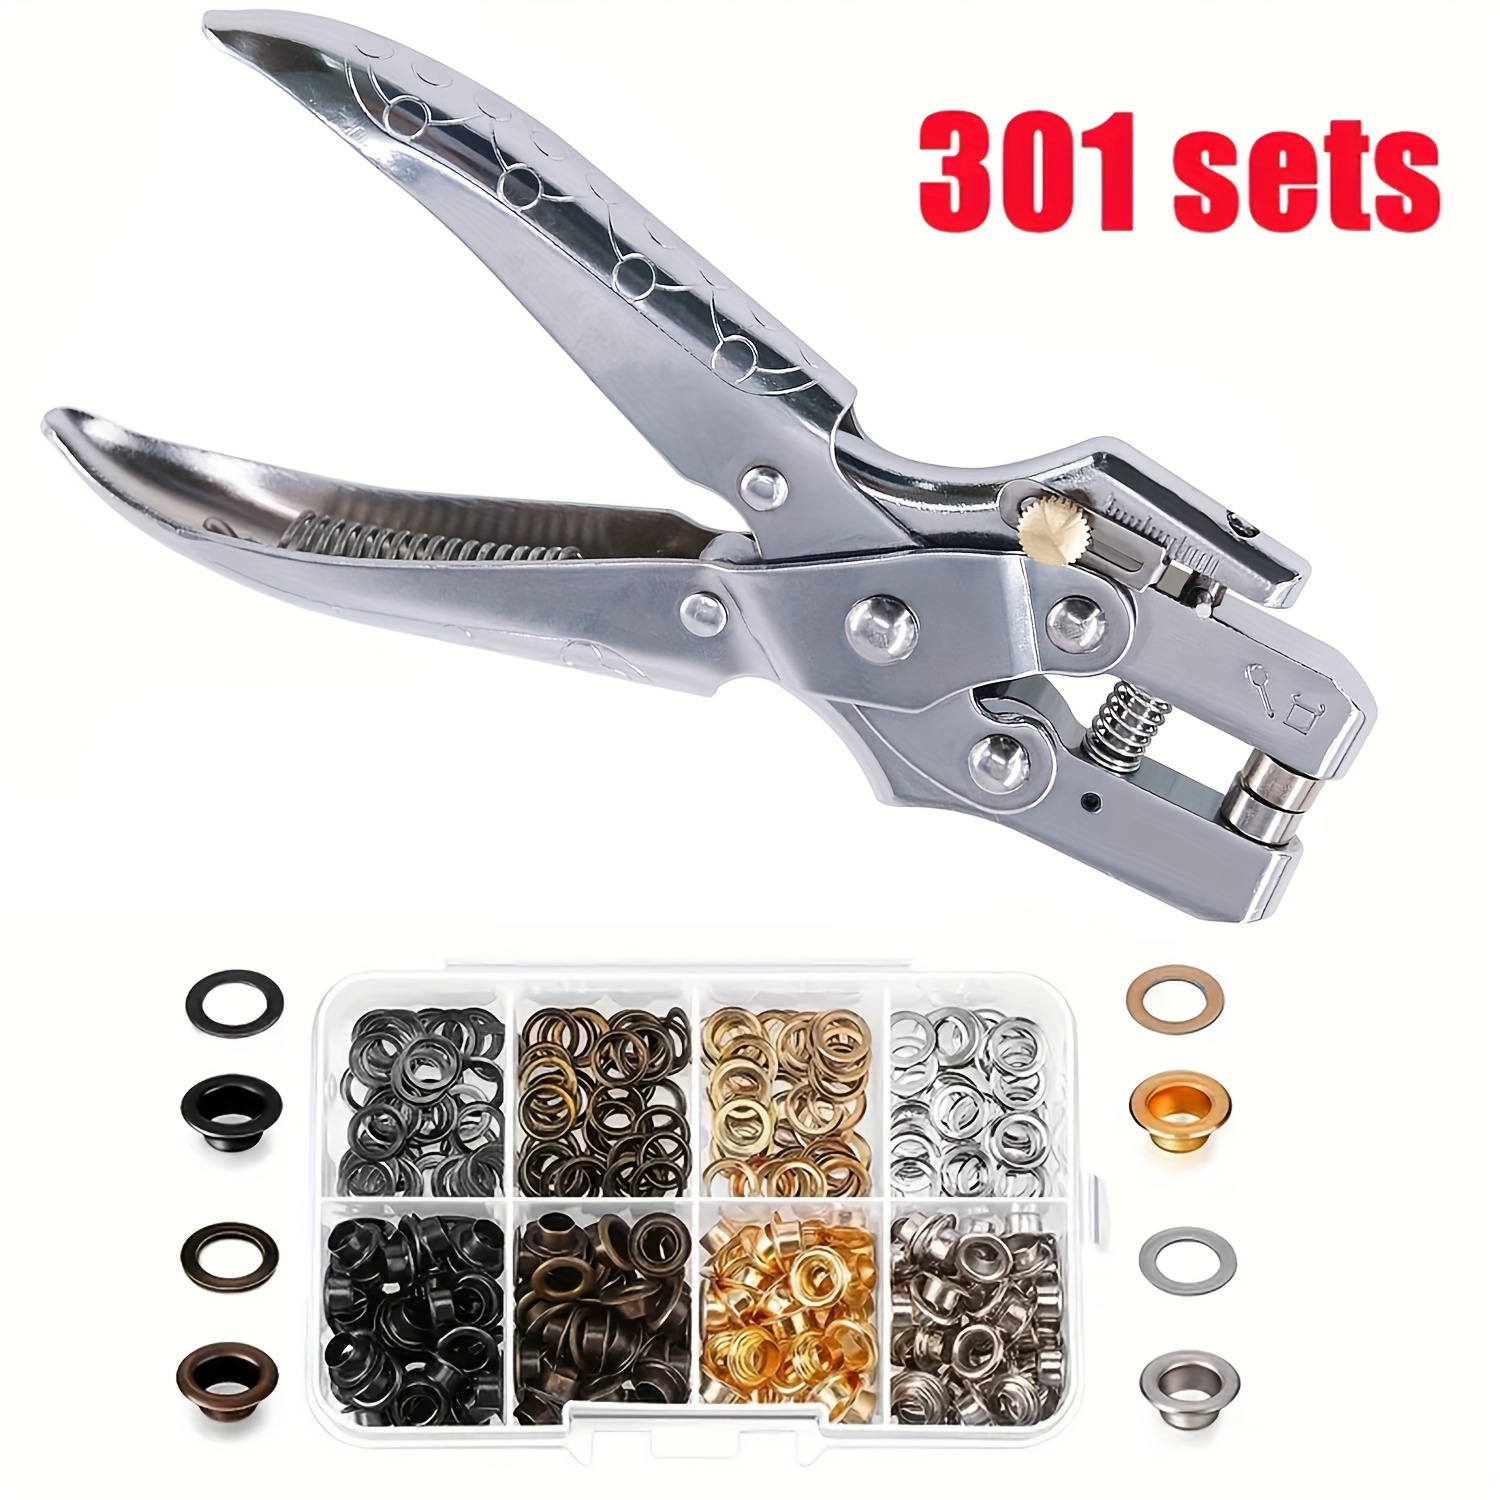 

301 Sets 3/16 Inch Grommet Tool Kit Grommet Eyelet Plier Set Eyelet Hole Punch Pliers Grommet Hand Press Pliers With 200pcs Of Grommets Eyelets For Shoes Clothes Bags Craft Supplies